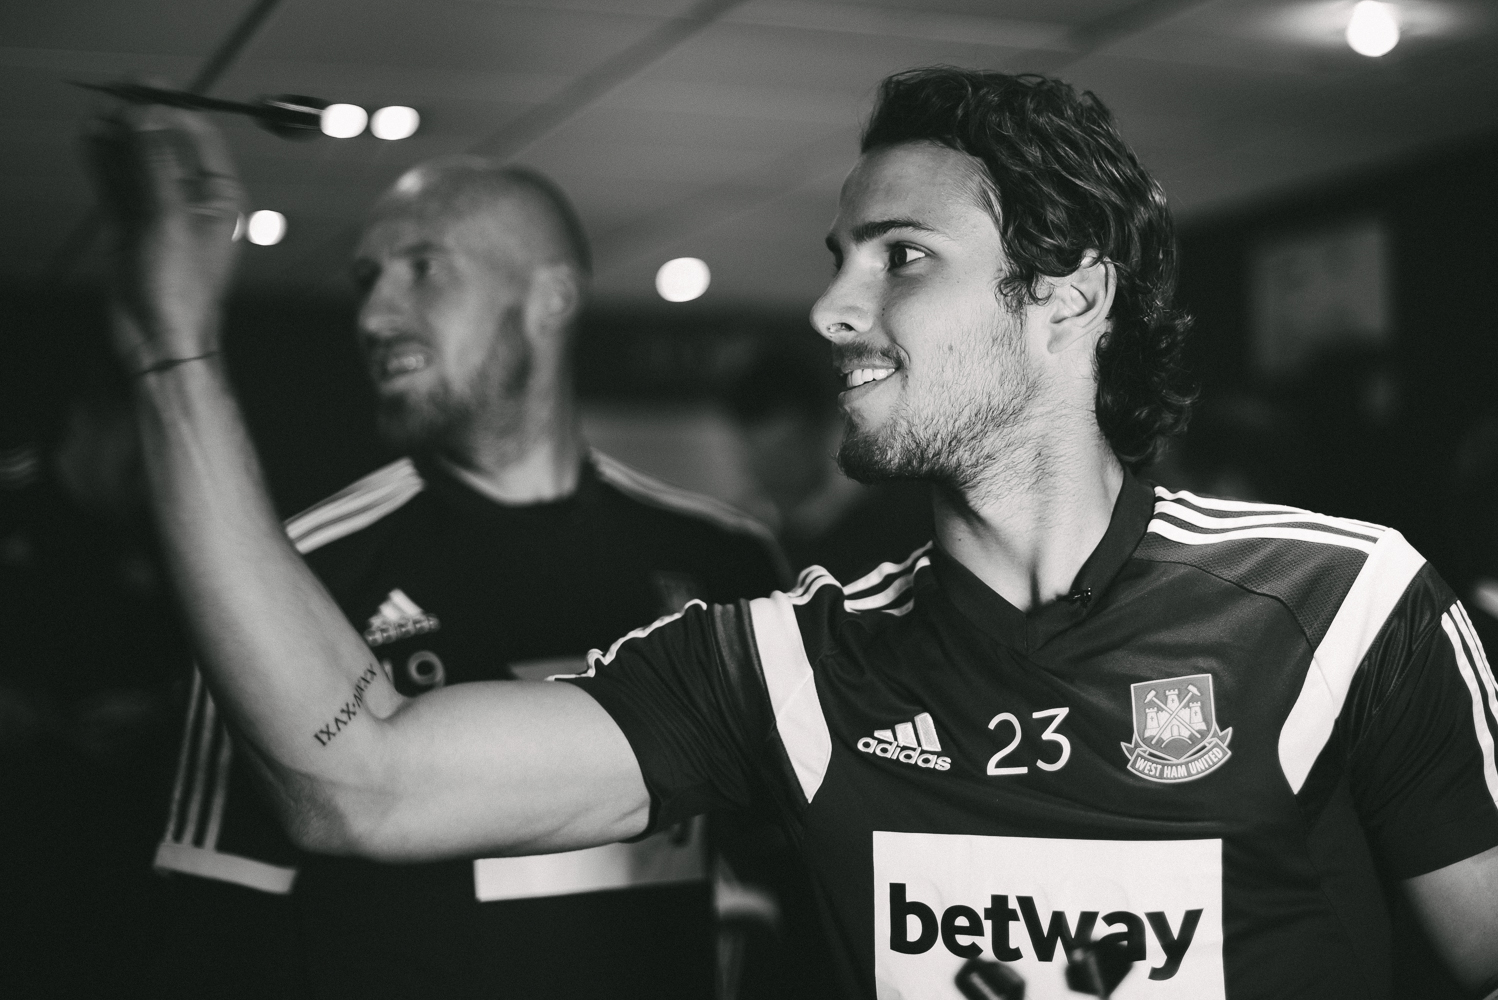 Betway_WestHam_Alex_Wallace_Photography_0115.jpg